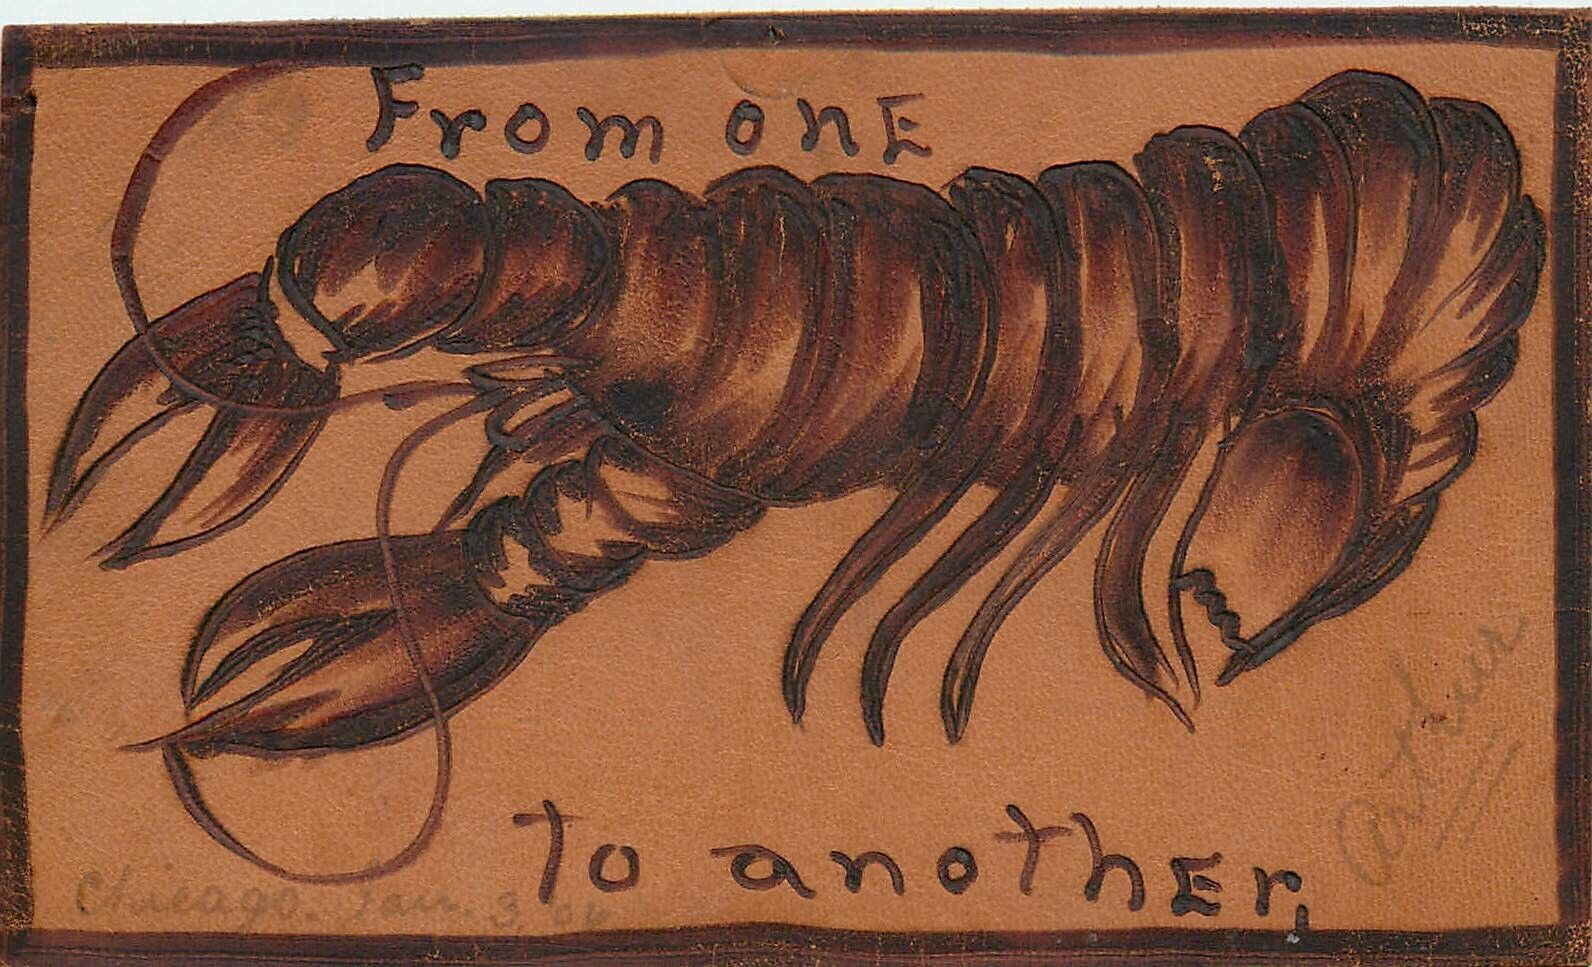 1906 Leather Rebus Art Postcard; From one (Lobster) to Another, Unposted